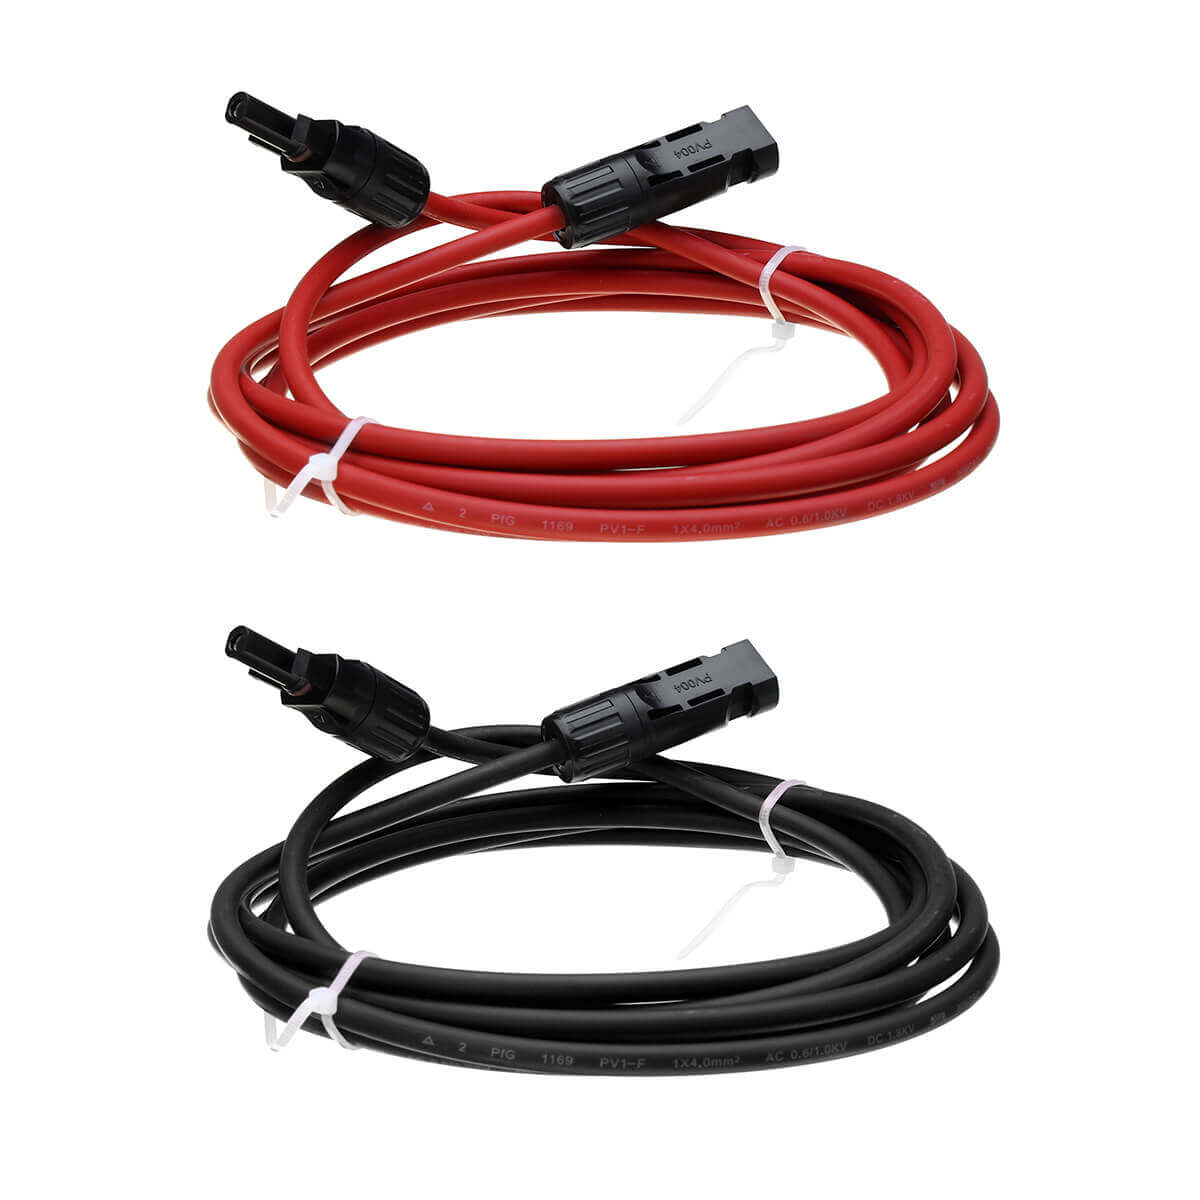 MC4 Extension Cable 25 ft.